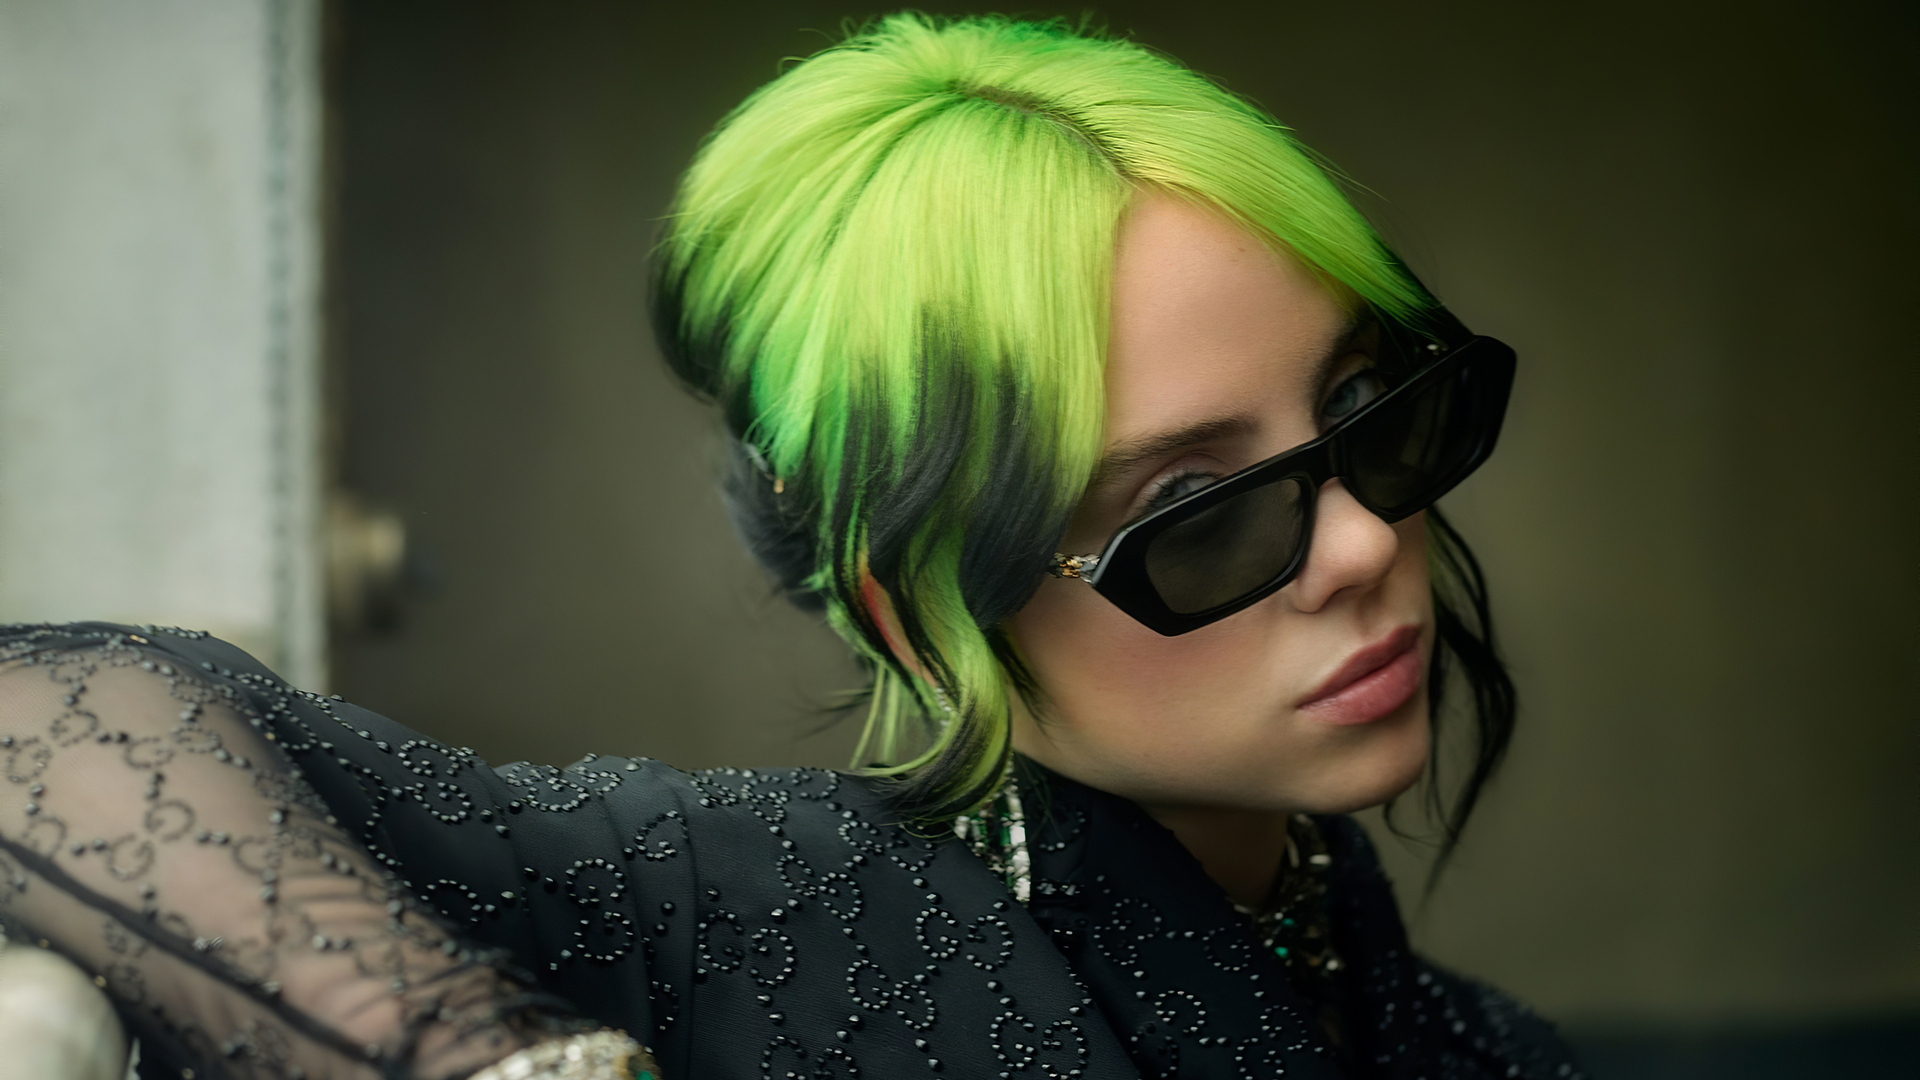 10. Billie Eilish's blue hair and black and green outfit from her "No Time to Die" music video for the James Bond film - wide 8